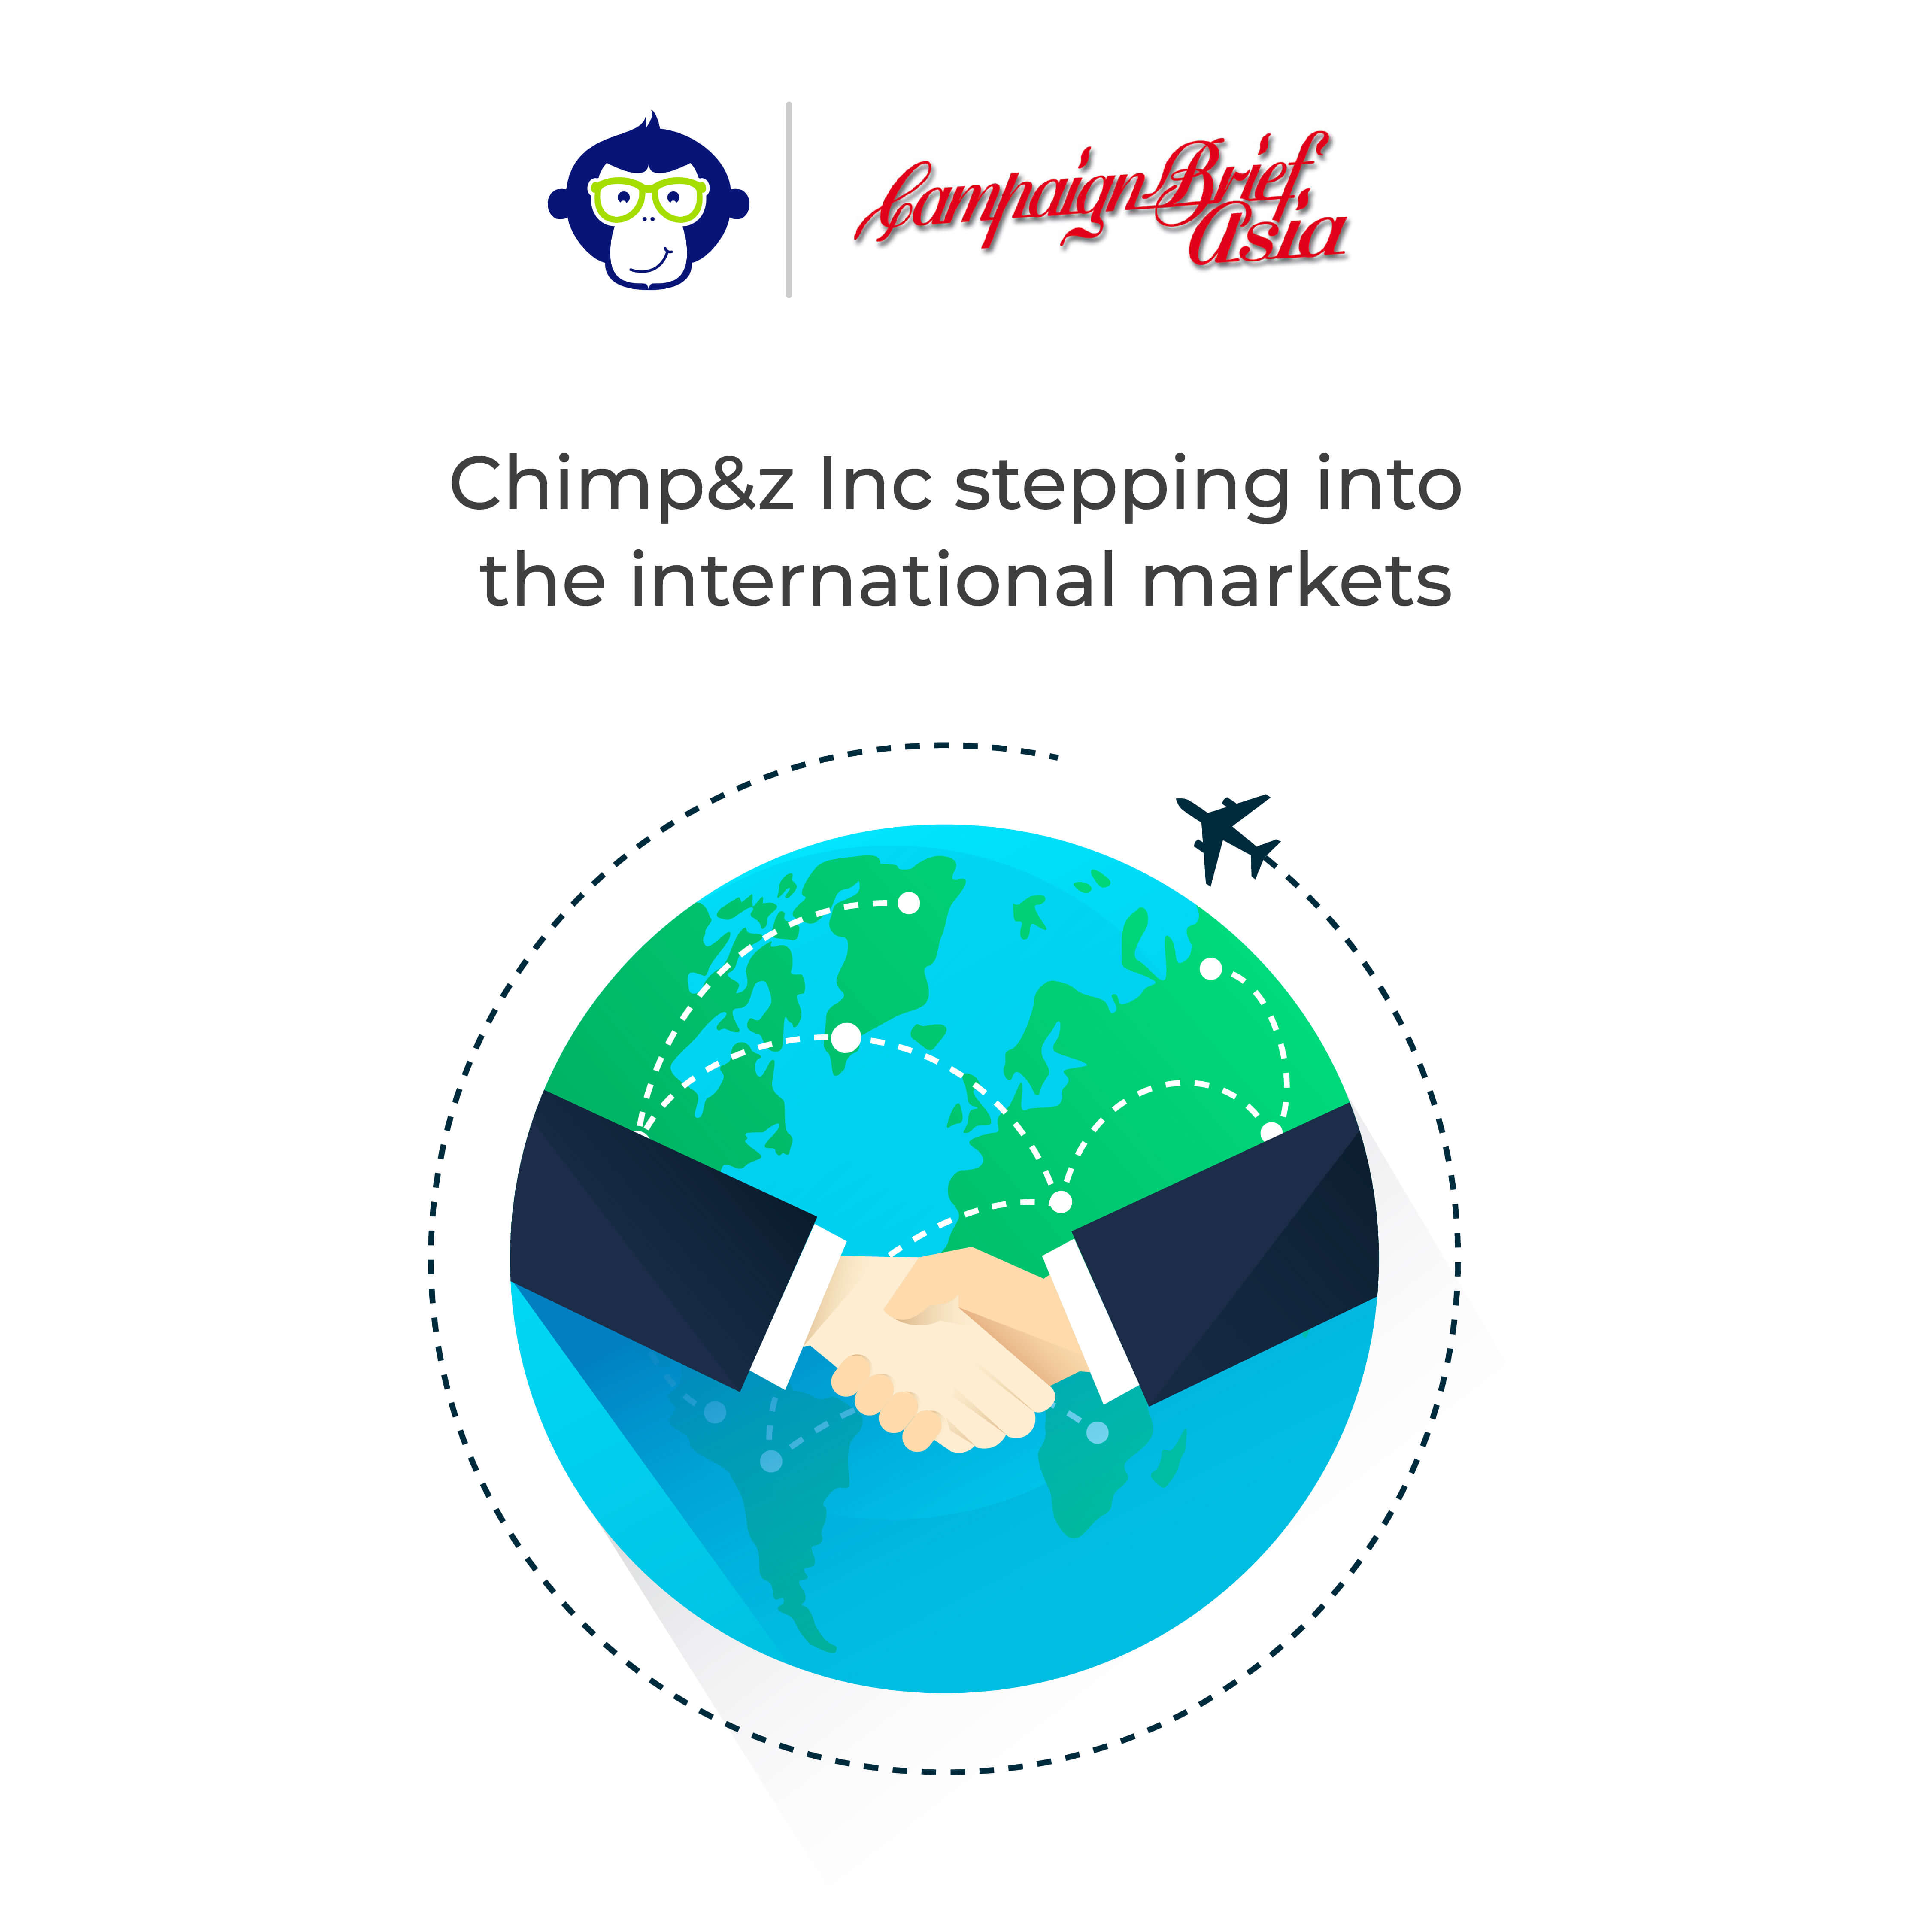 Chimp&z Inc opens new offices in New York and Toronto